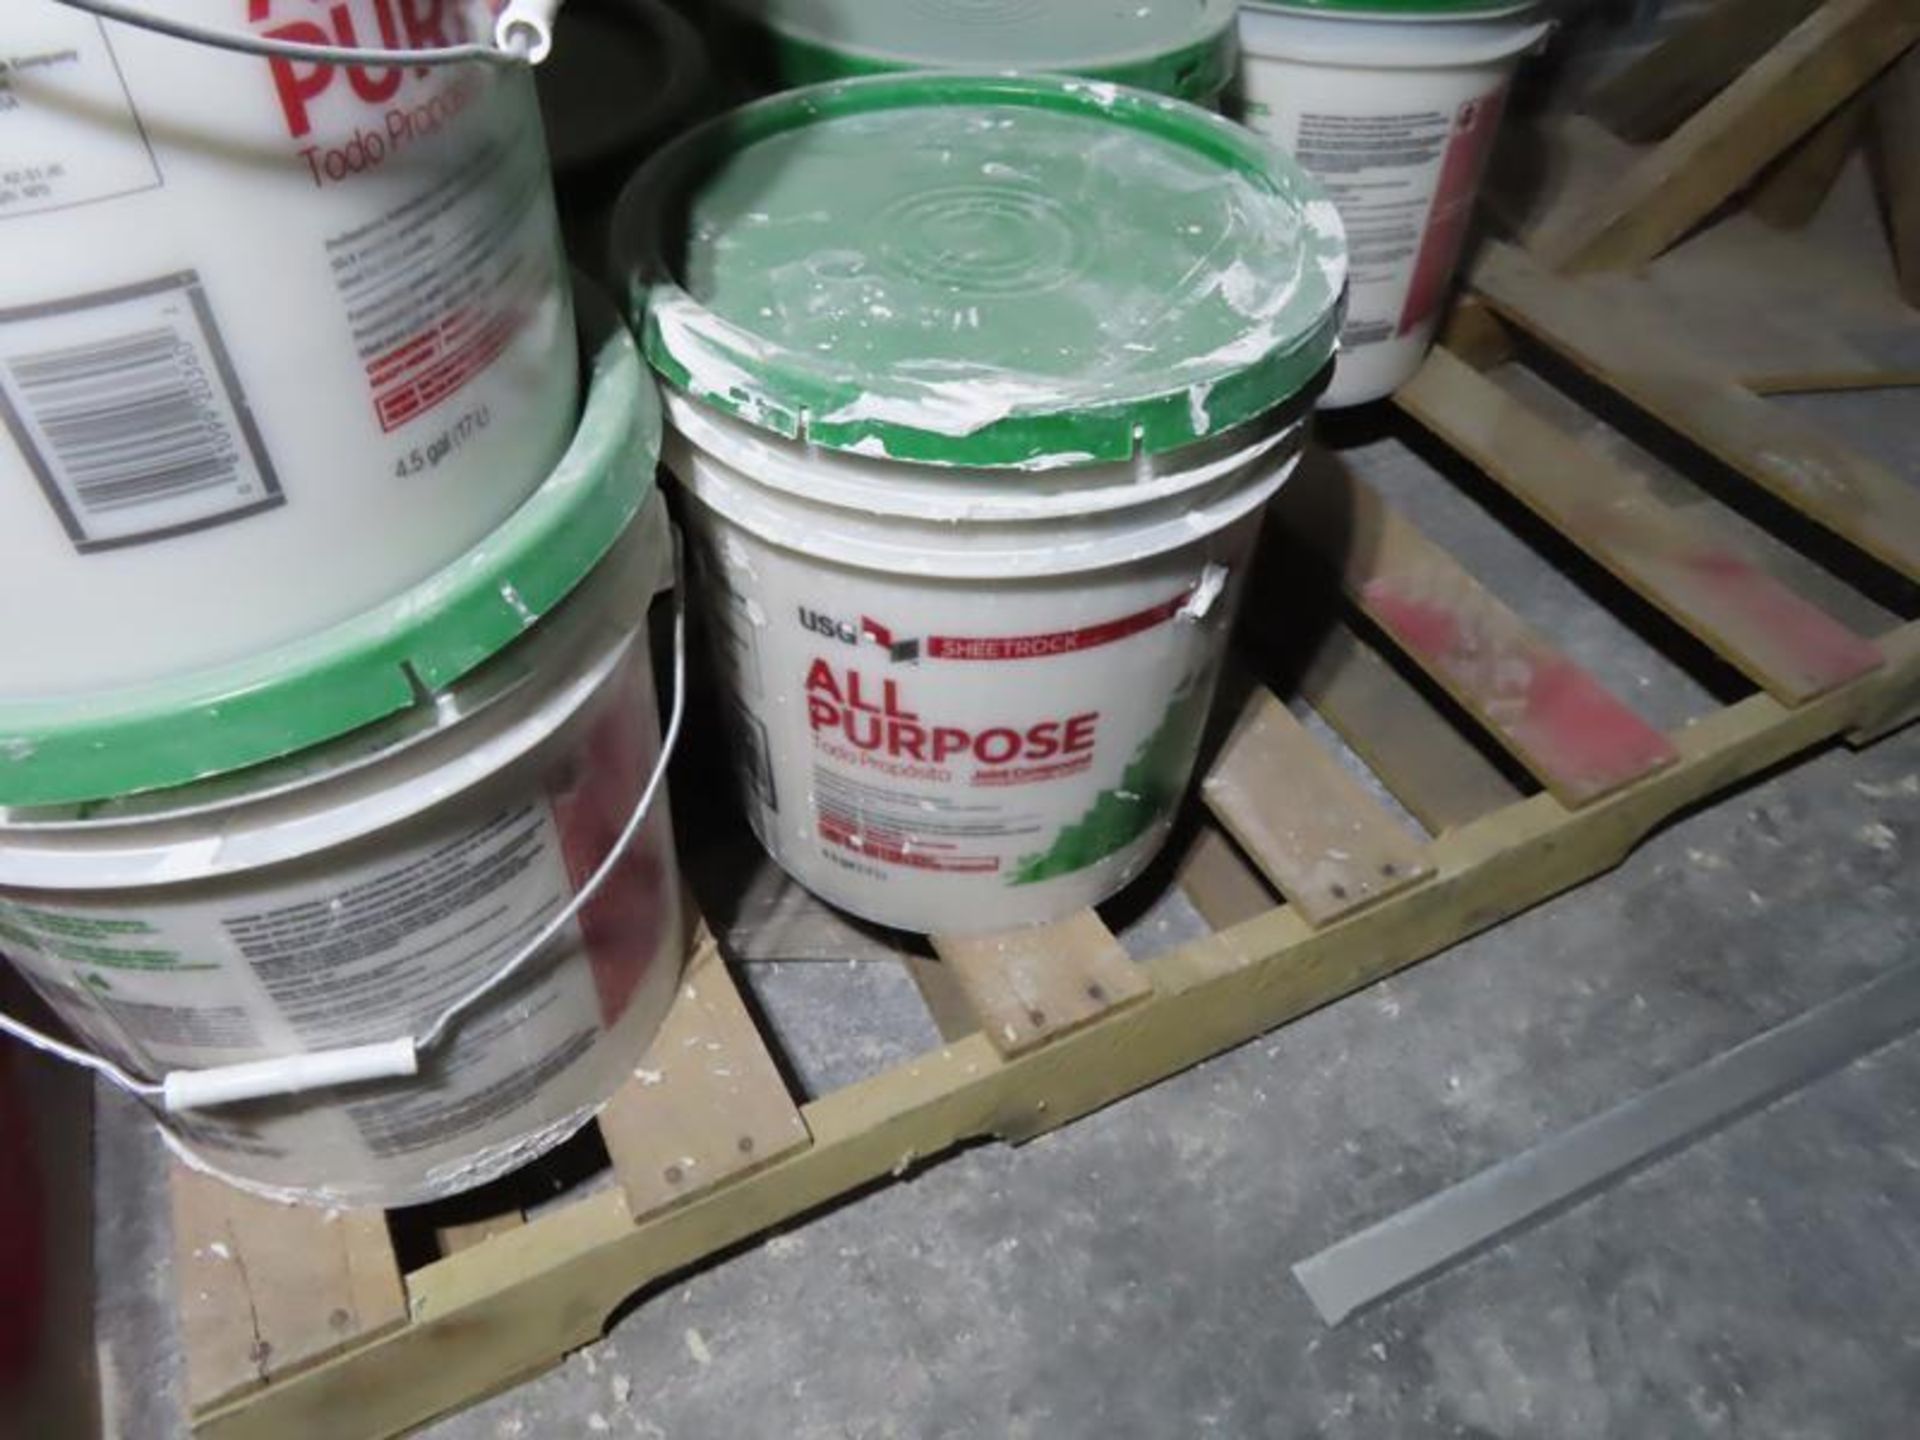 JOINT TAPE, ALL PURPOSE SHEET ROCK COMPOUND, EASY SAND 90 COMPOUND - 3 PALLETS OF MISC COMPOUND MARK - Image 6 of 6